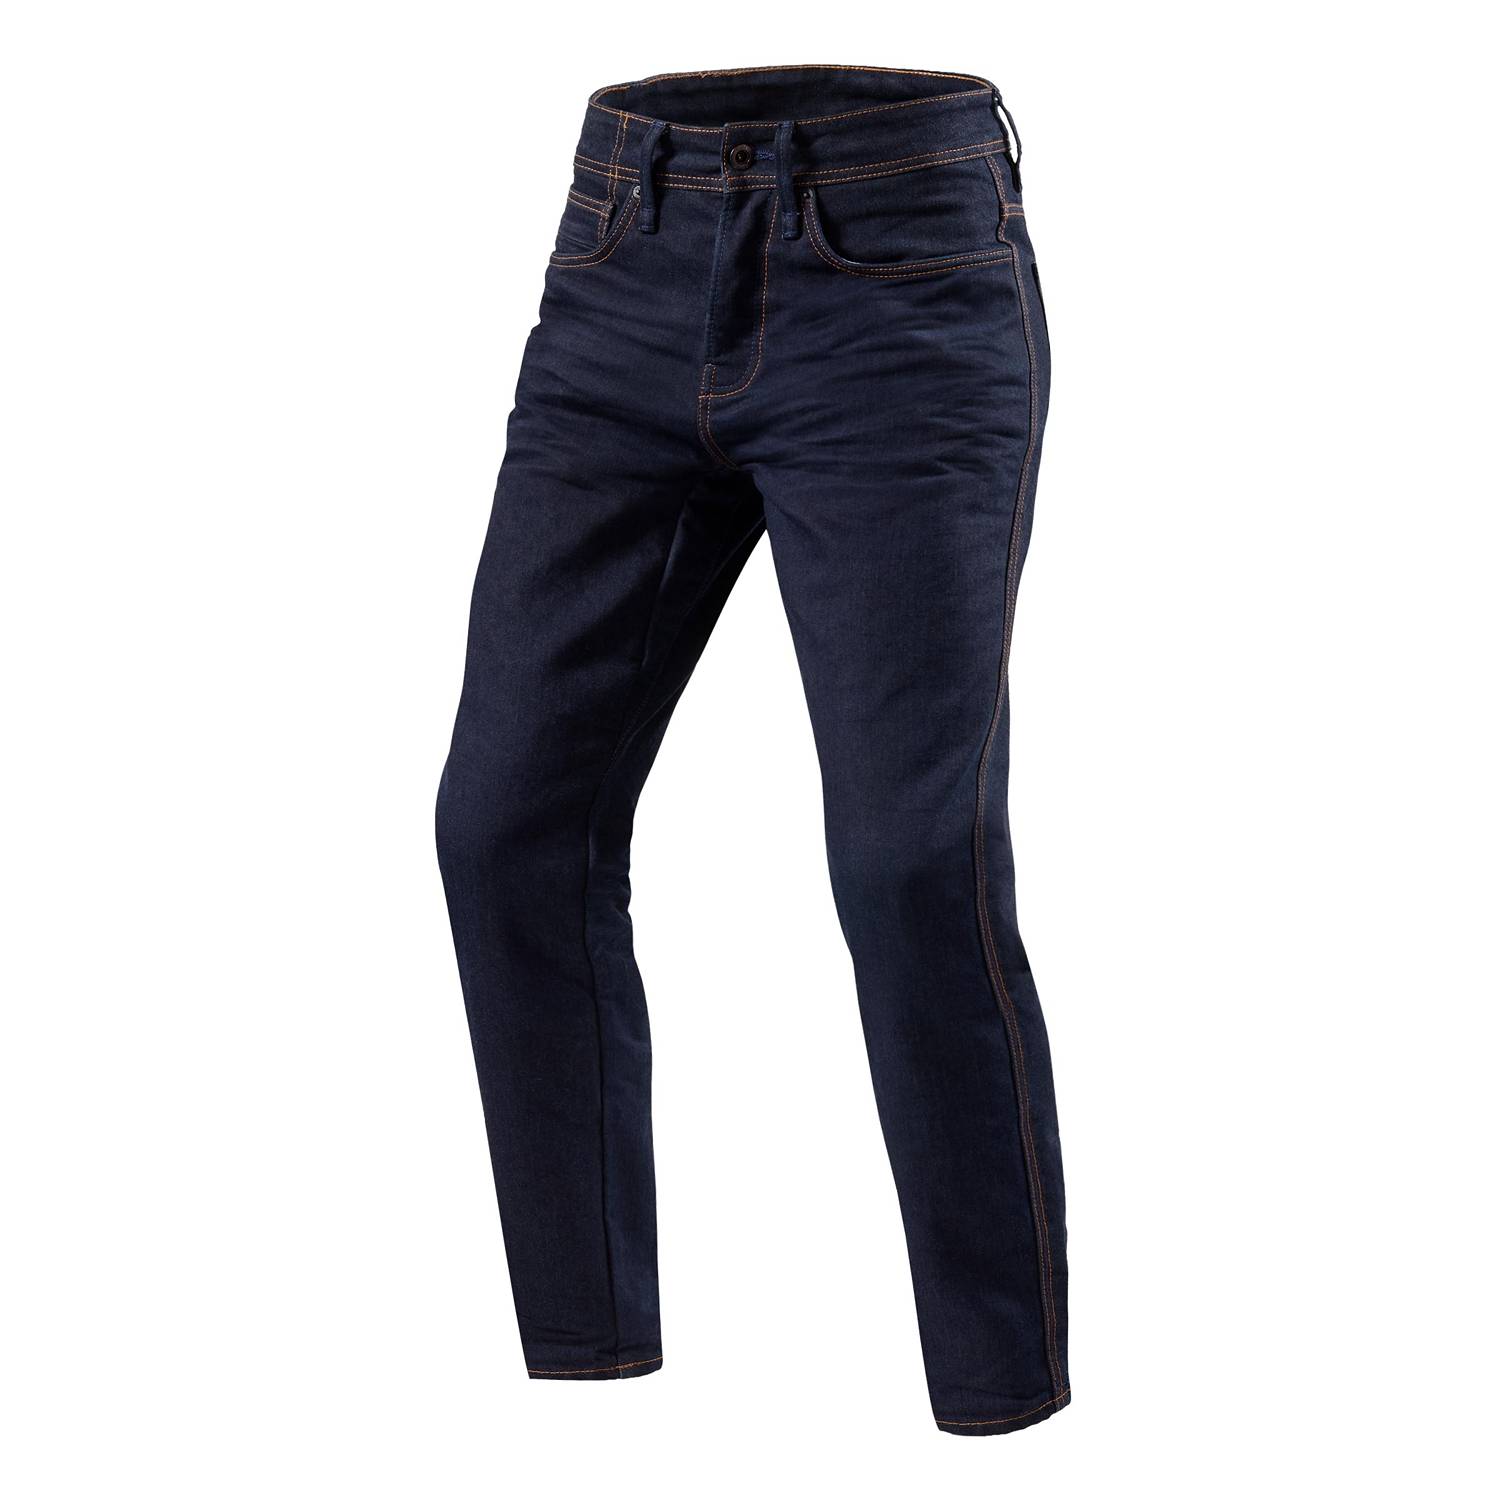 Image of REV'IT! Jeans Reed RF Dark Blue Used Motorcycle Jeans Size L34/W28 ID 8700001336864